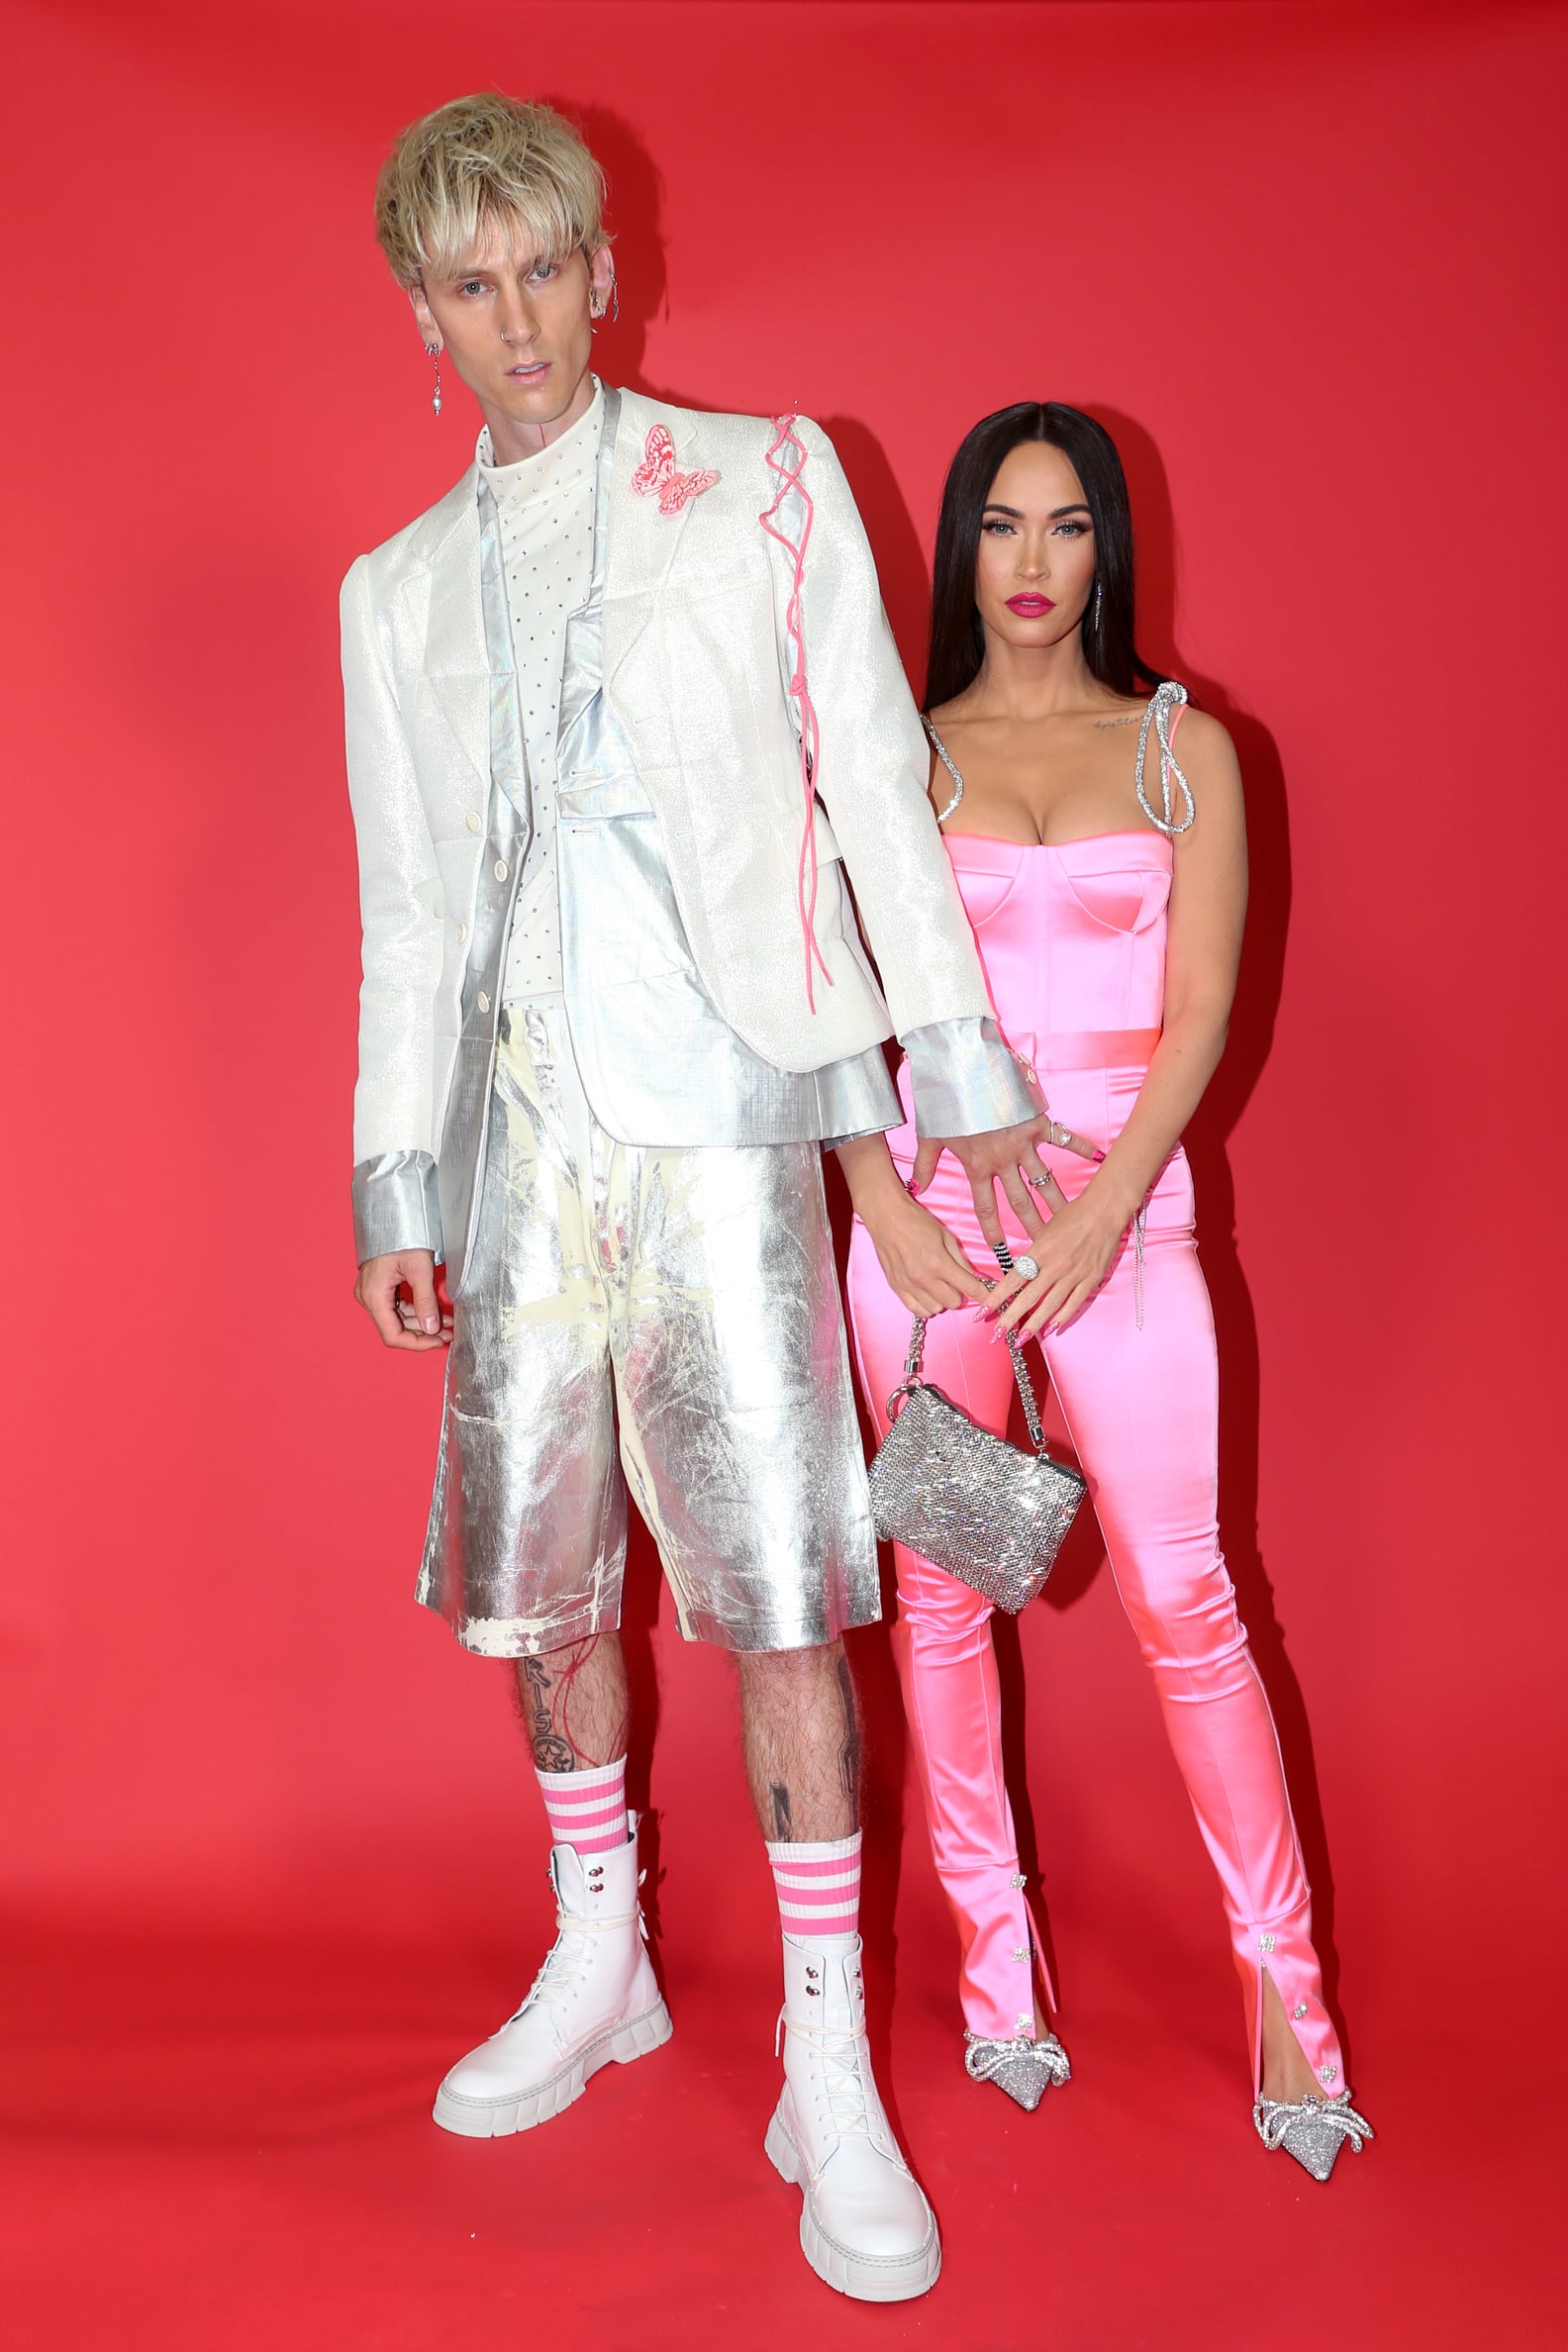 Megan Fox's Pink Outfit at the iHeartRadio Music Awards | POPSUGAR Fashion